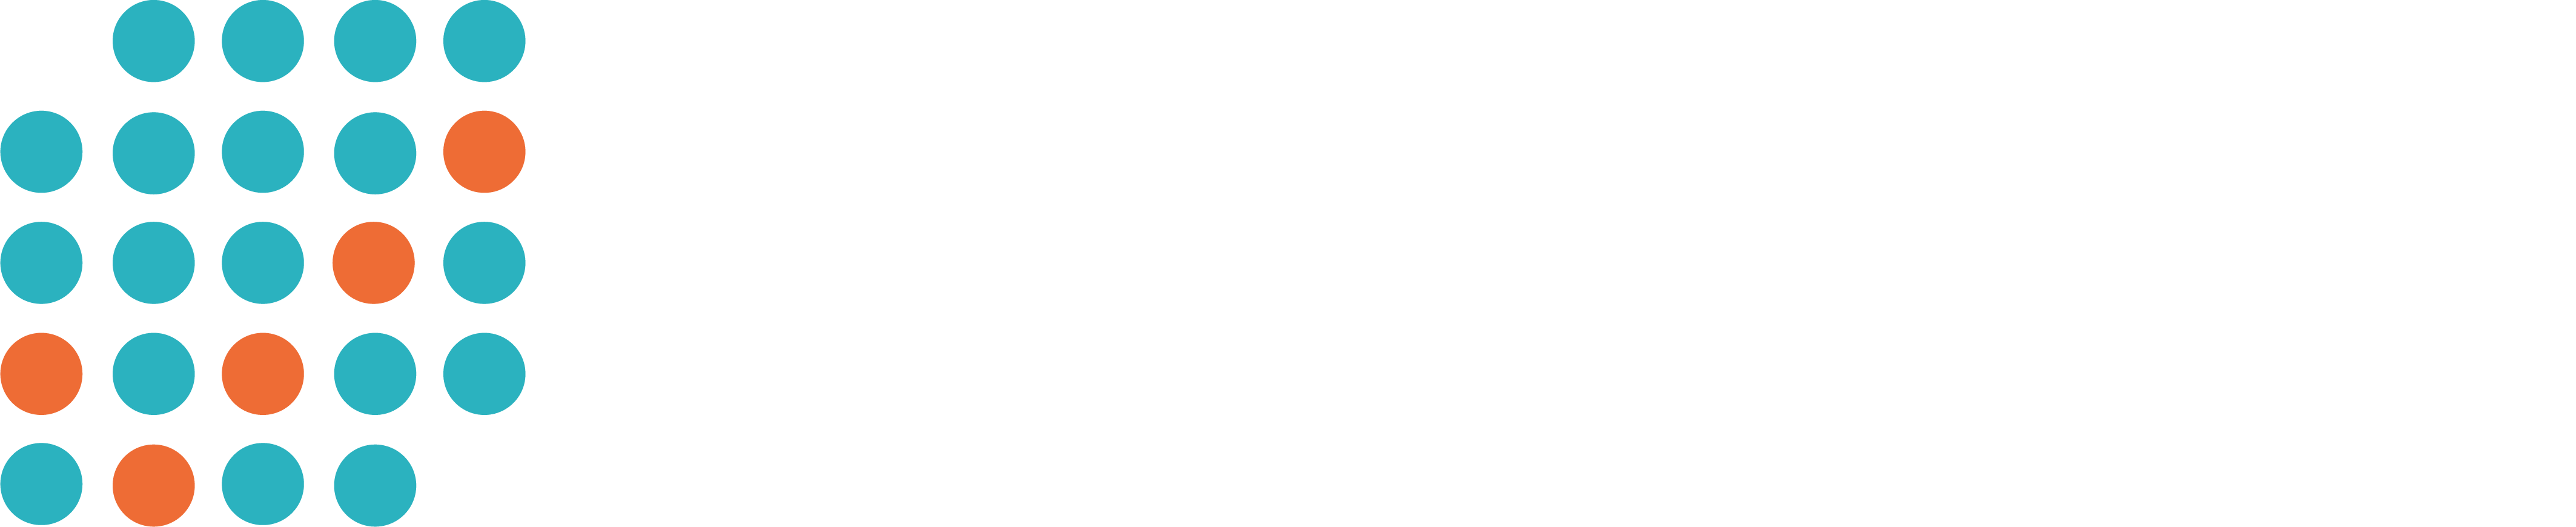 Fact Check Africa